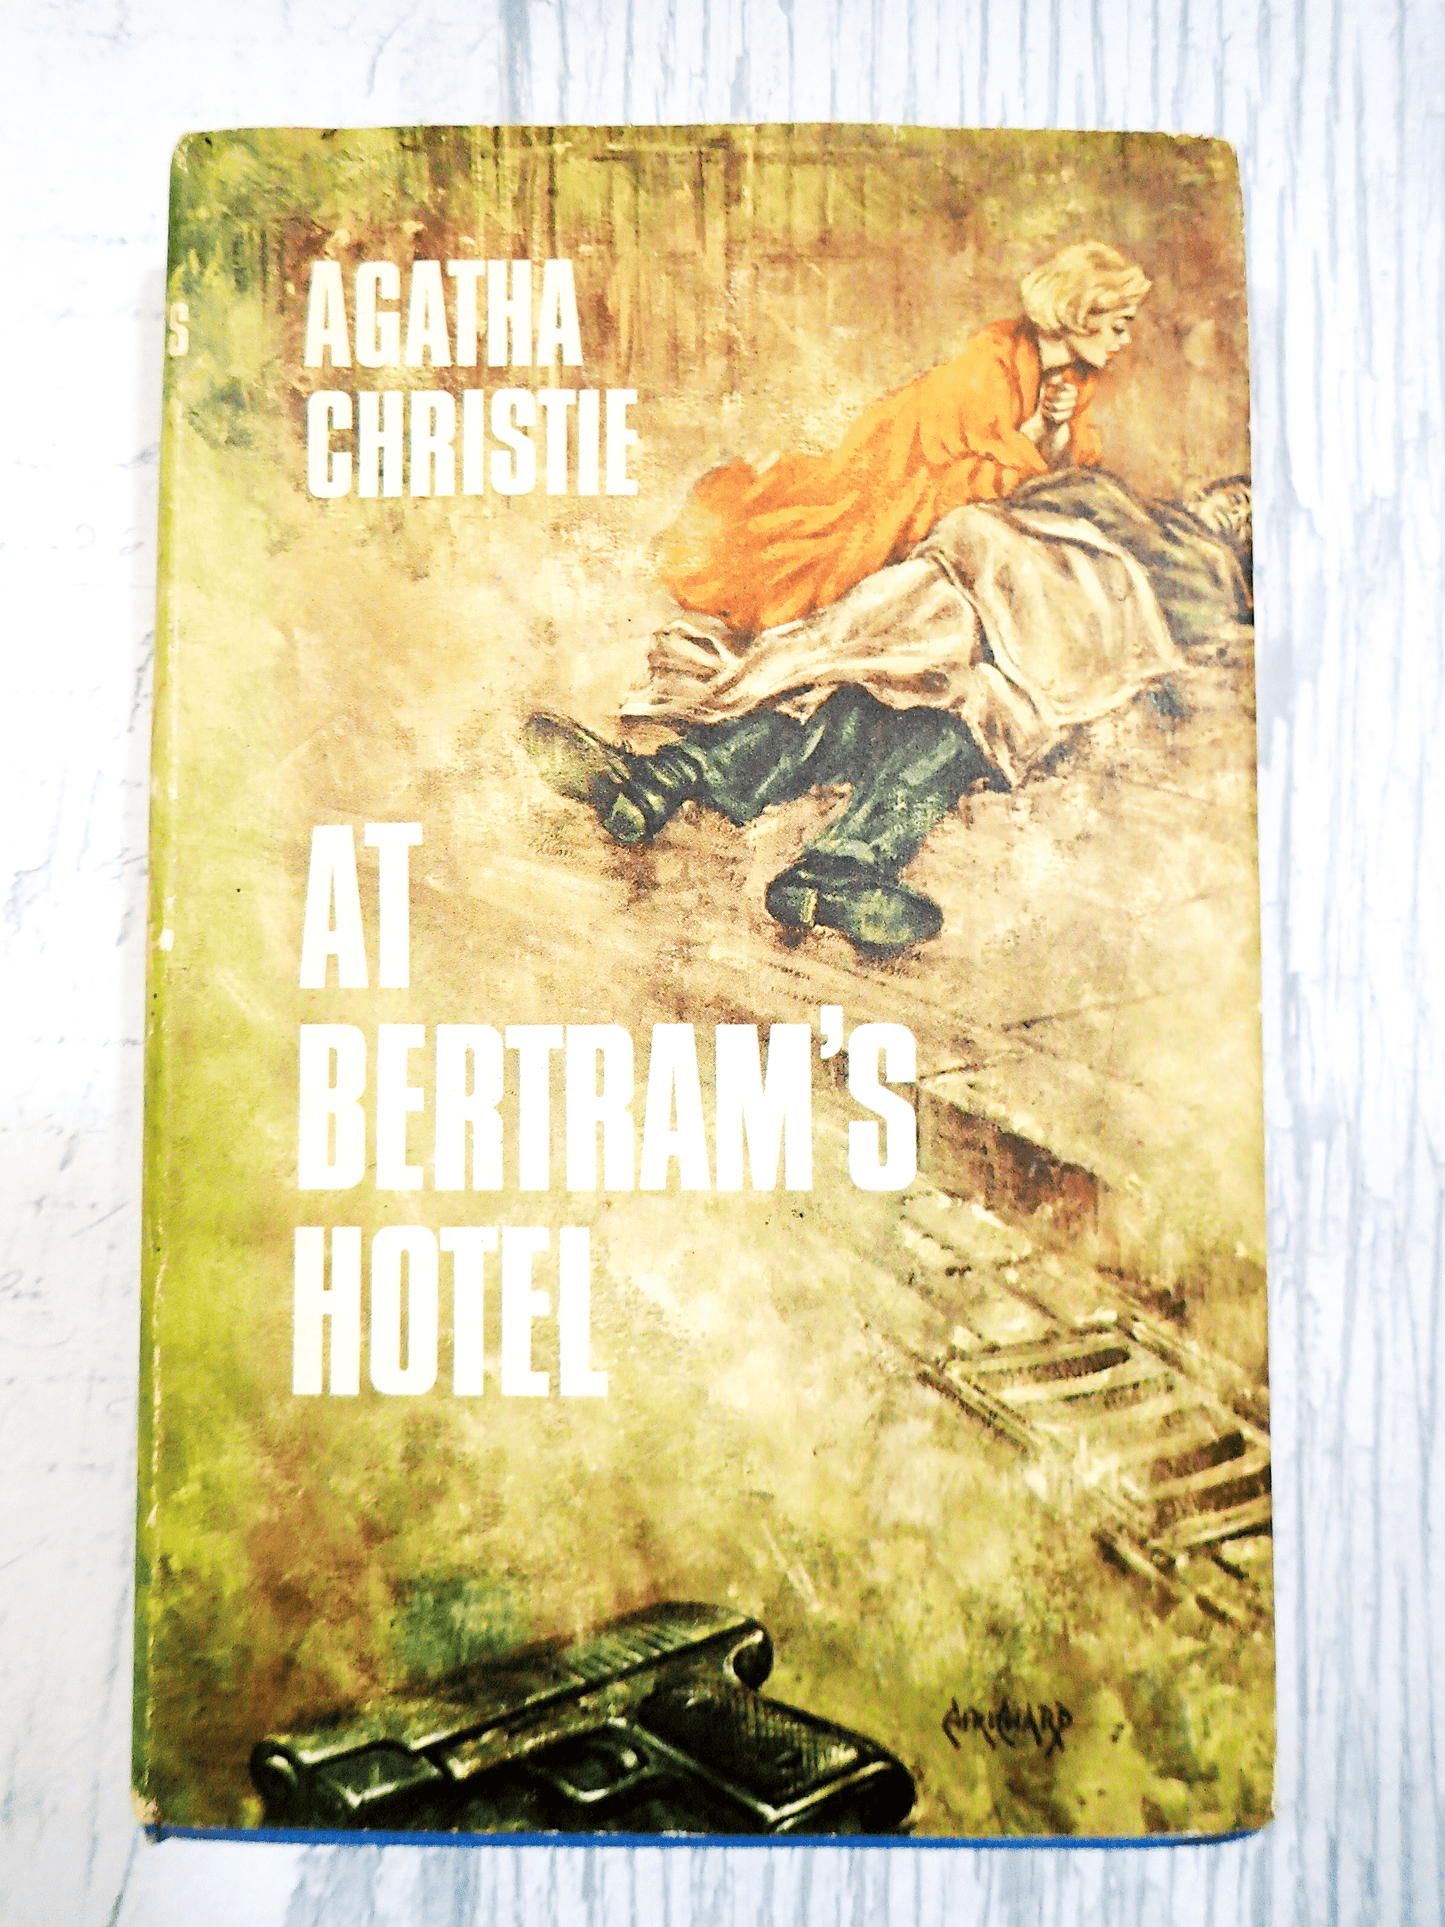 Front cover of Agatha Christie's At Bertrams Hotel Vintage Book Classic Crime Fiction 1950's Hardback showing a man lying on the street with a woman attending to him and a gun at the forefront against a light background. 